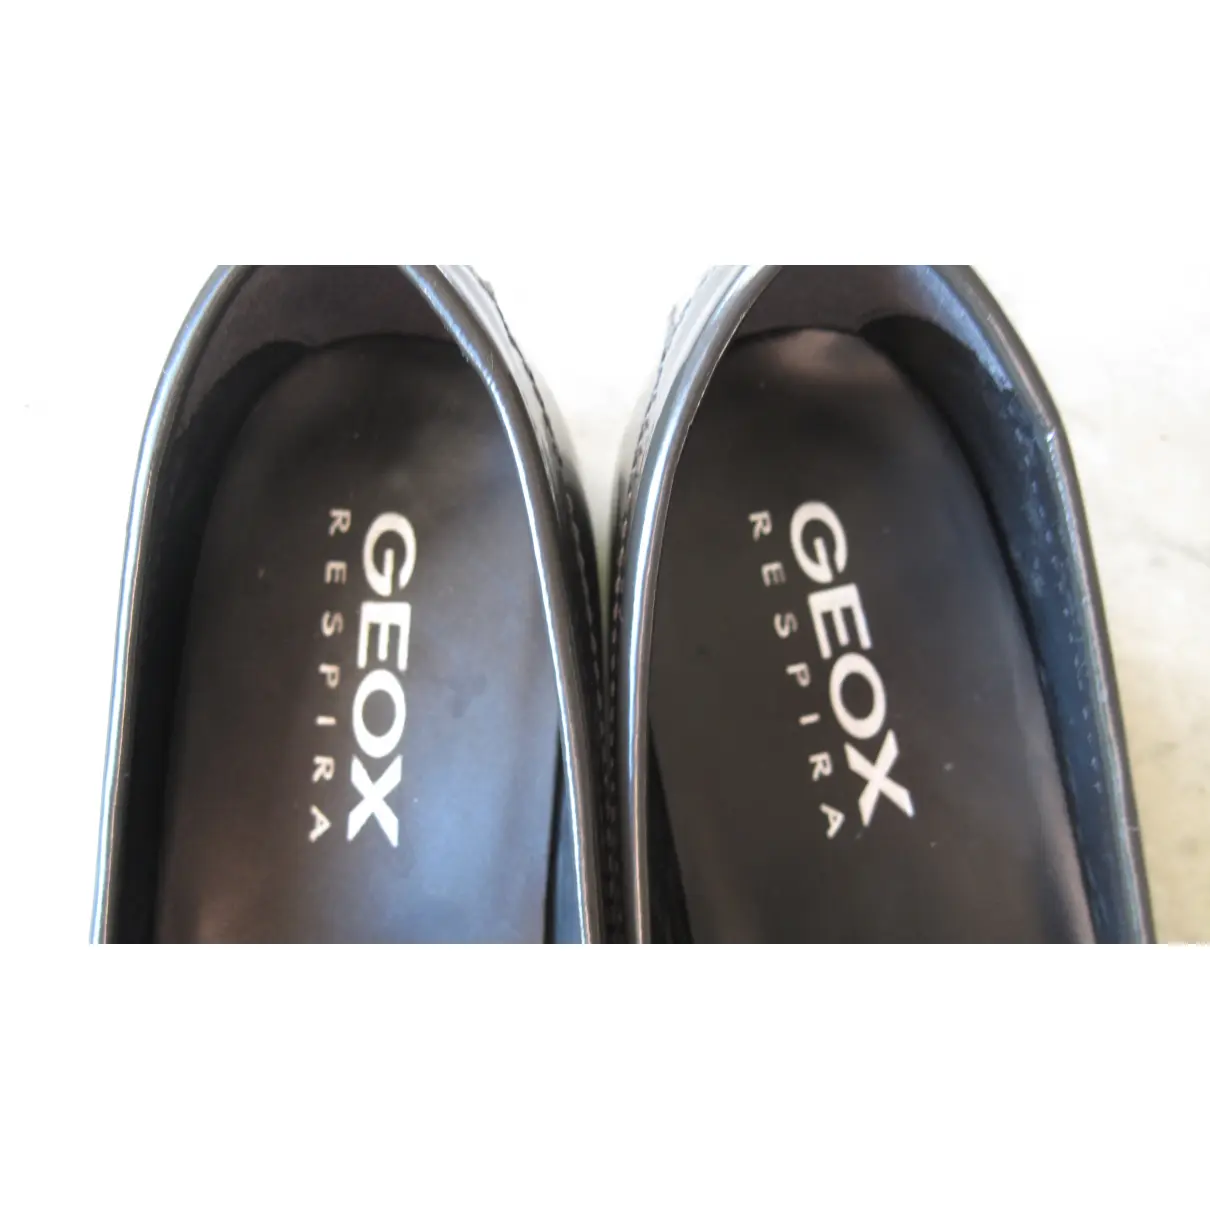 Patent leather flats GEOX